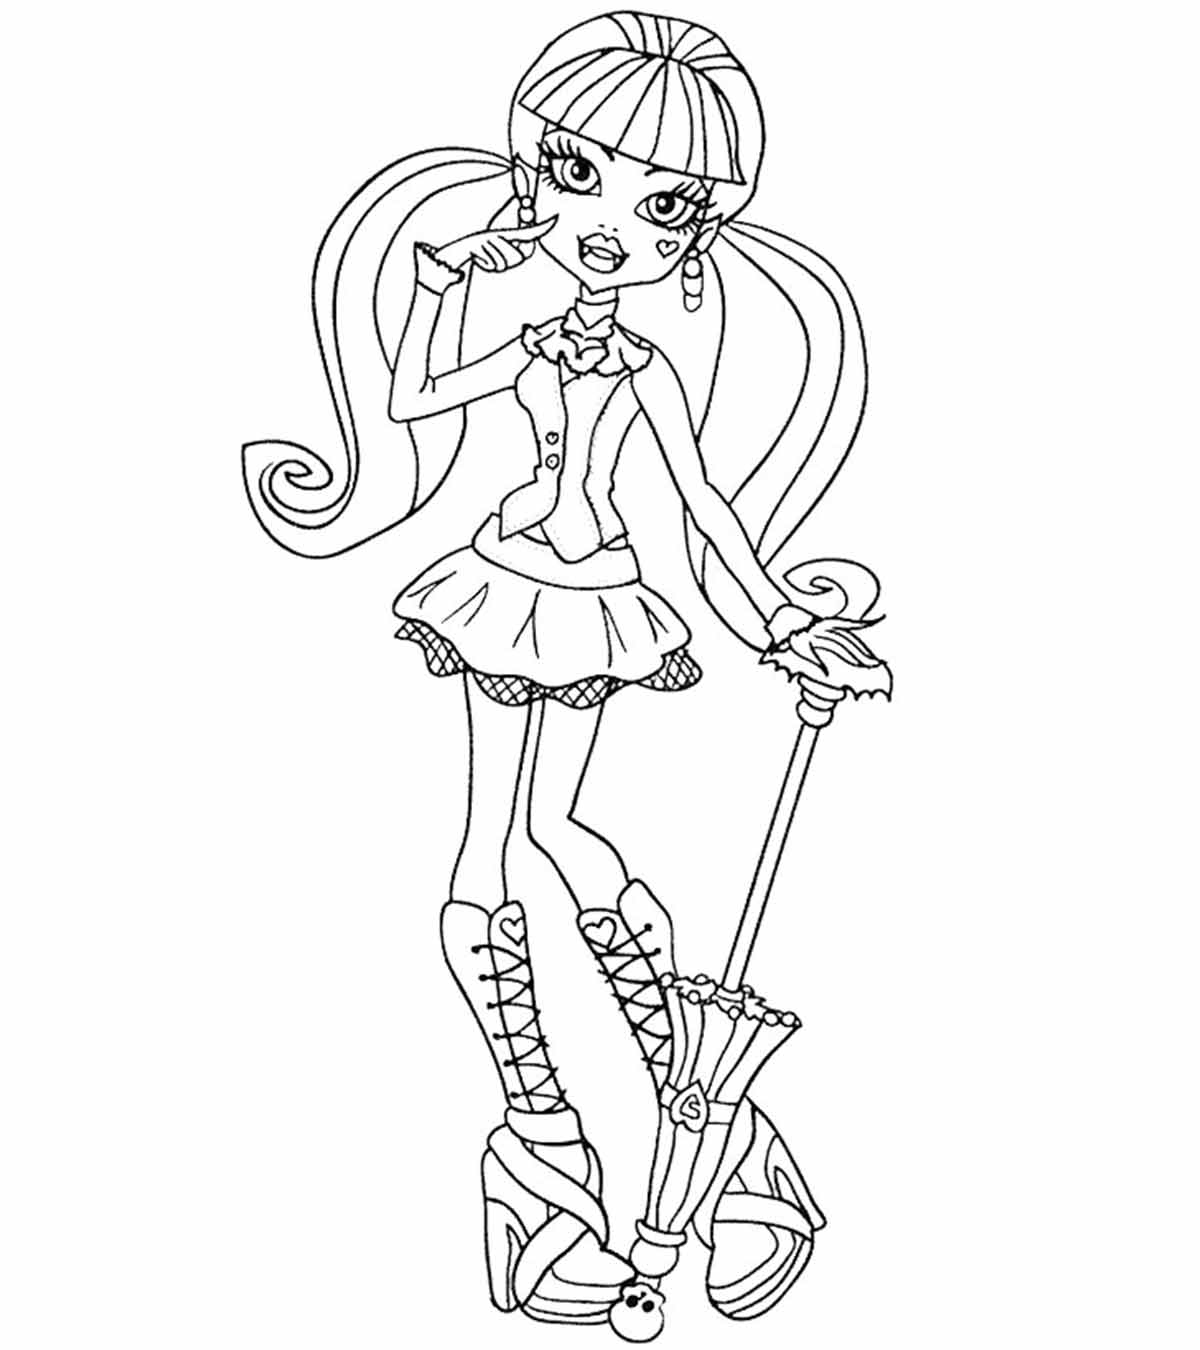 Top 27 Monster High Coloring Pages For Your Little Ones_image